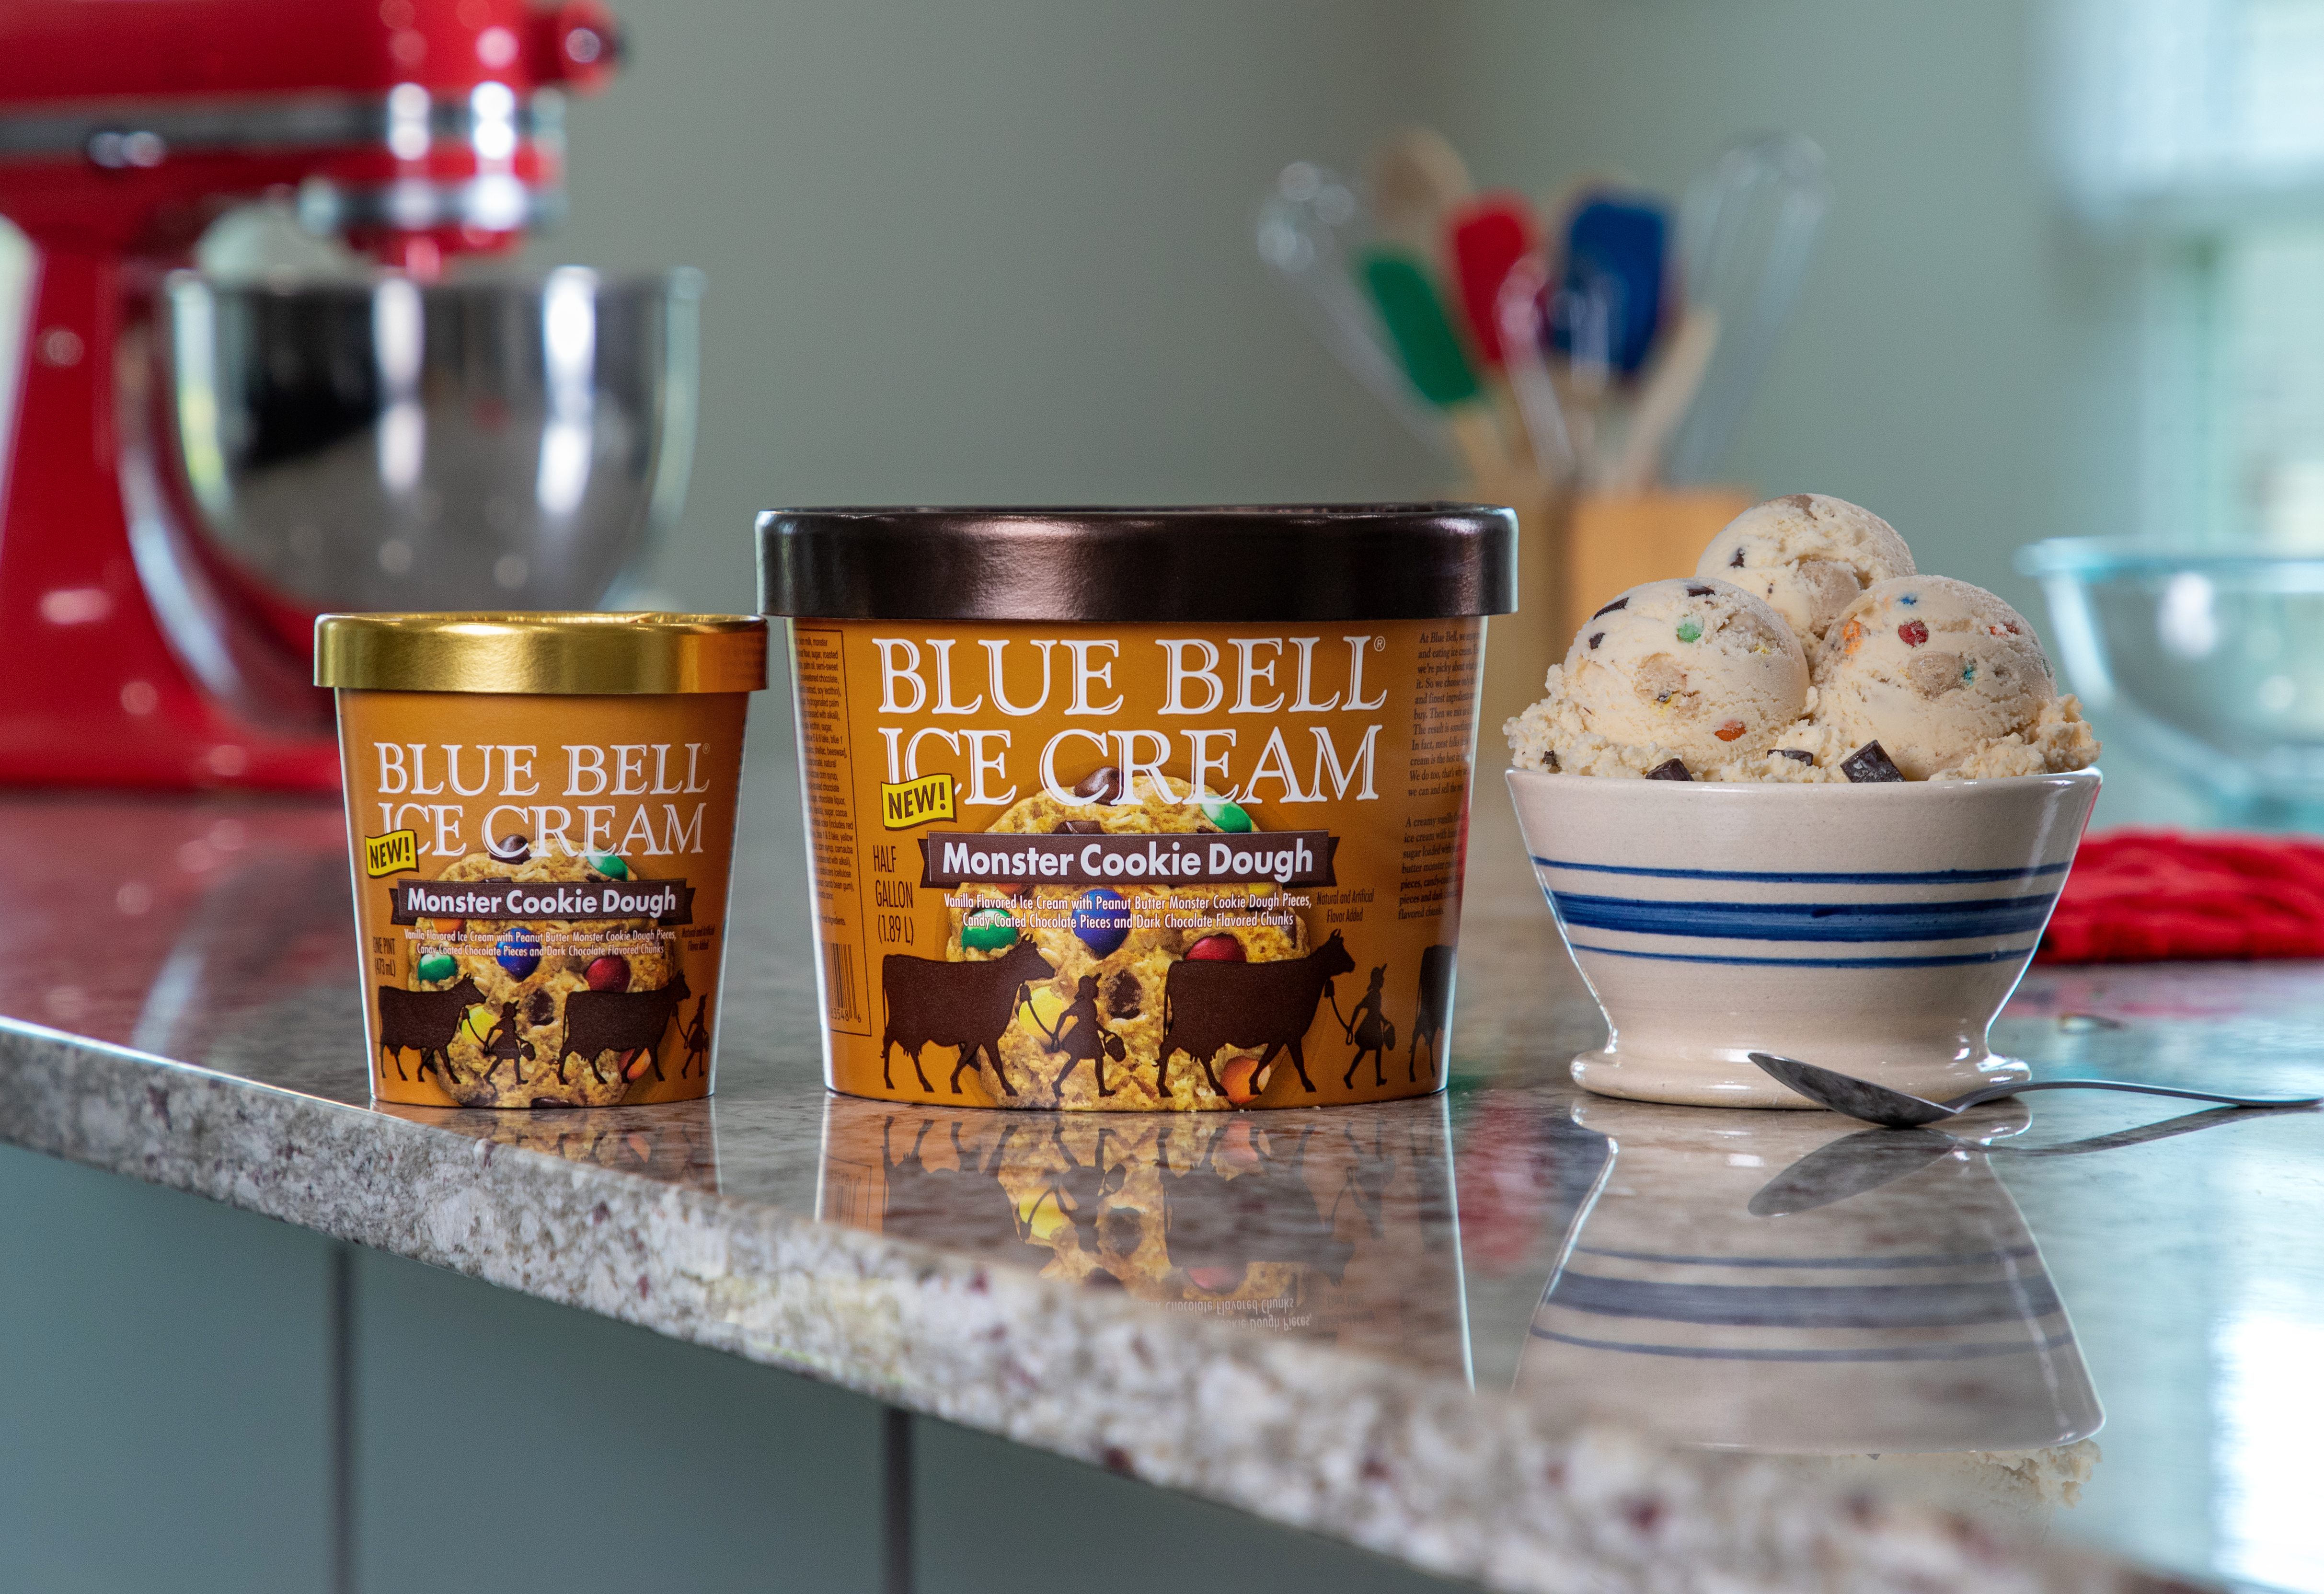 Blue Bell releases new limited-edition Monster Cookie Dough flavor